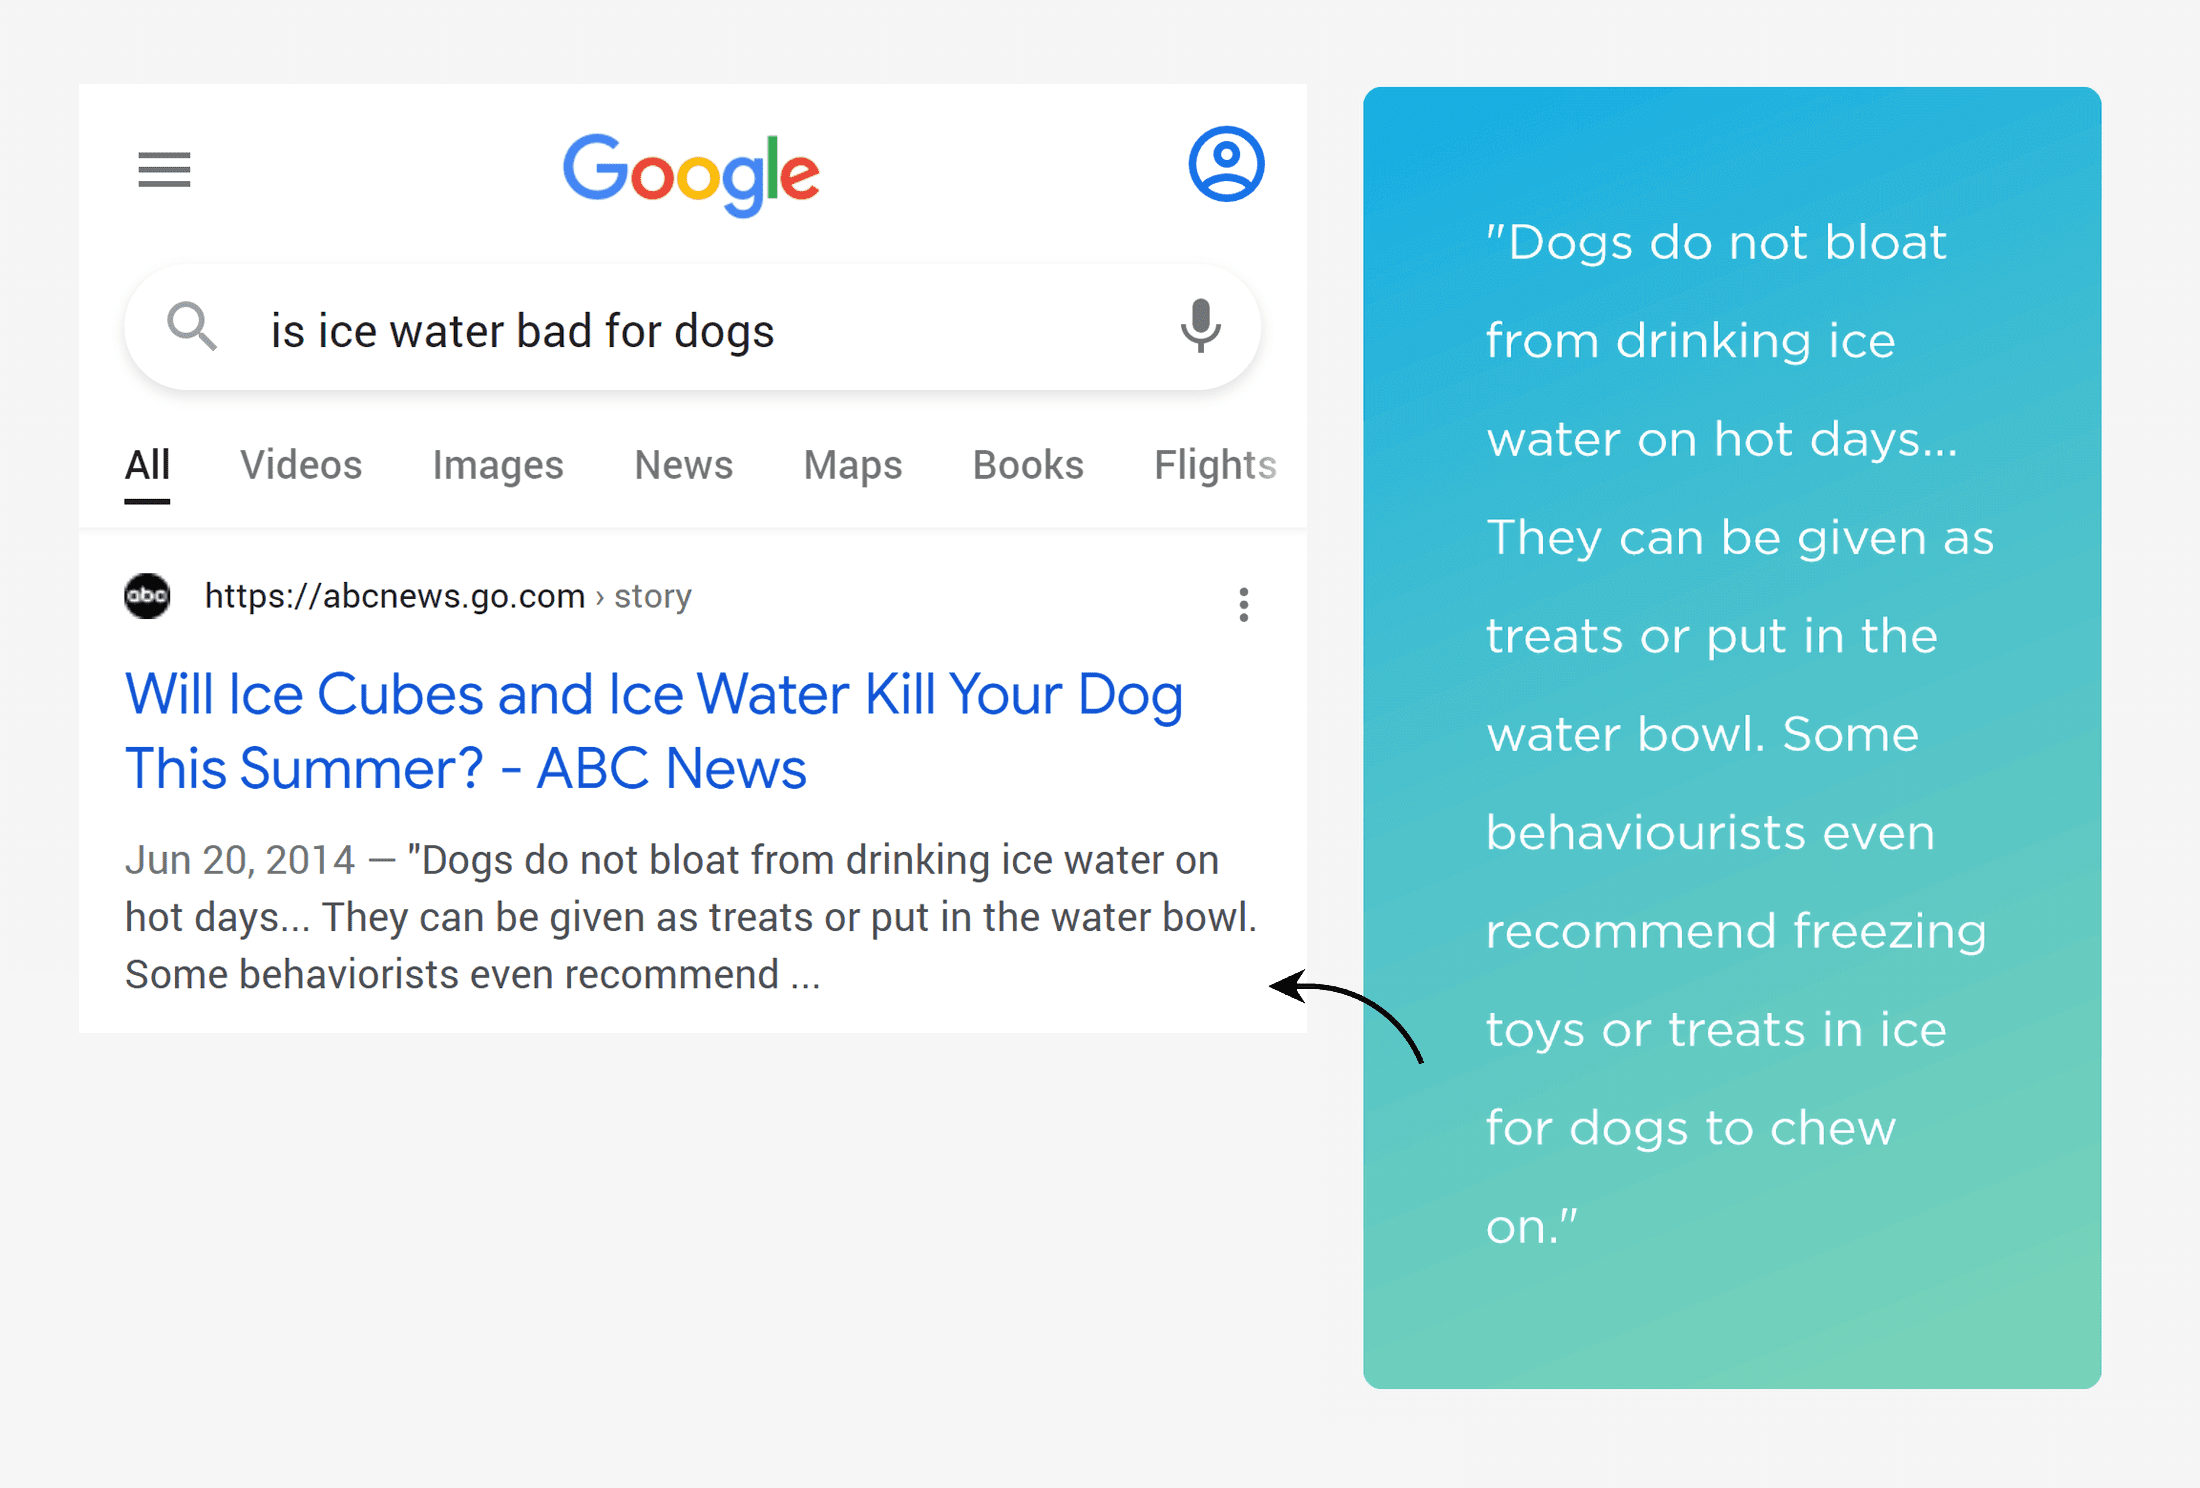 Voice search – Ice water for dogs